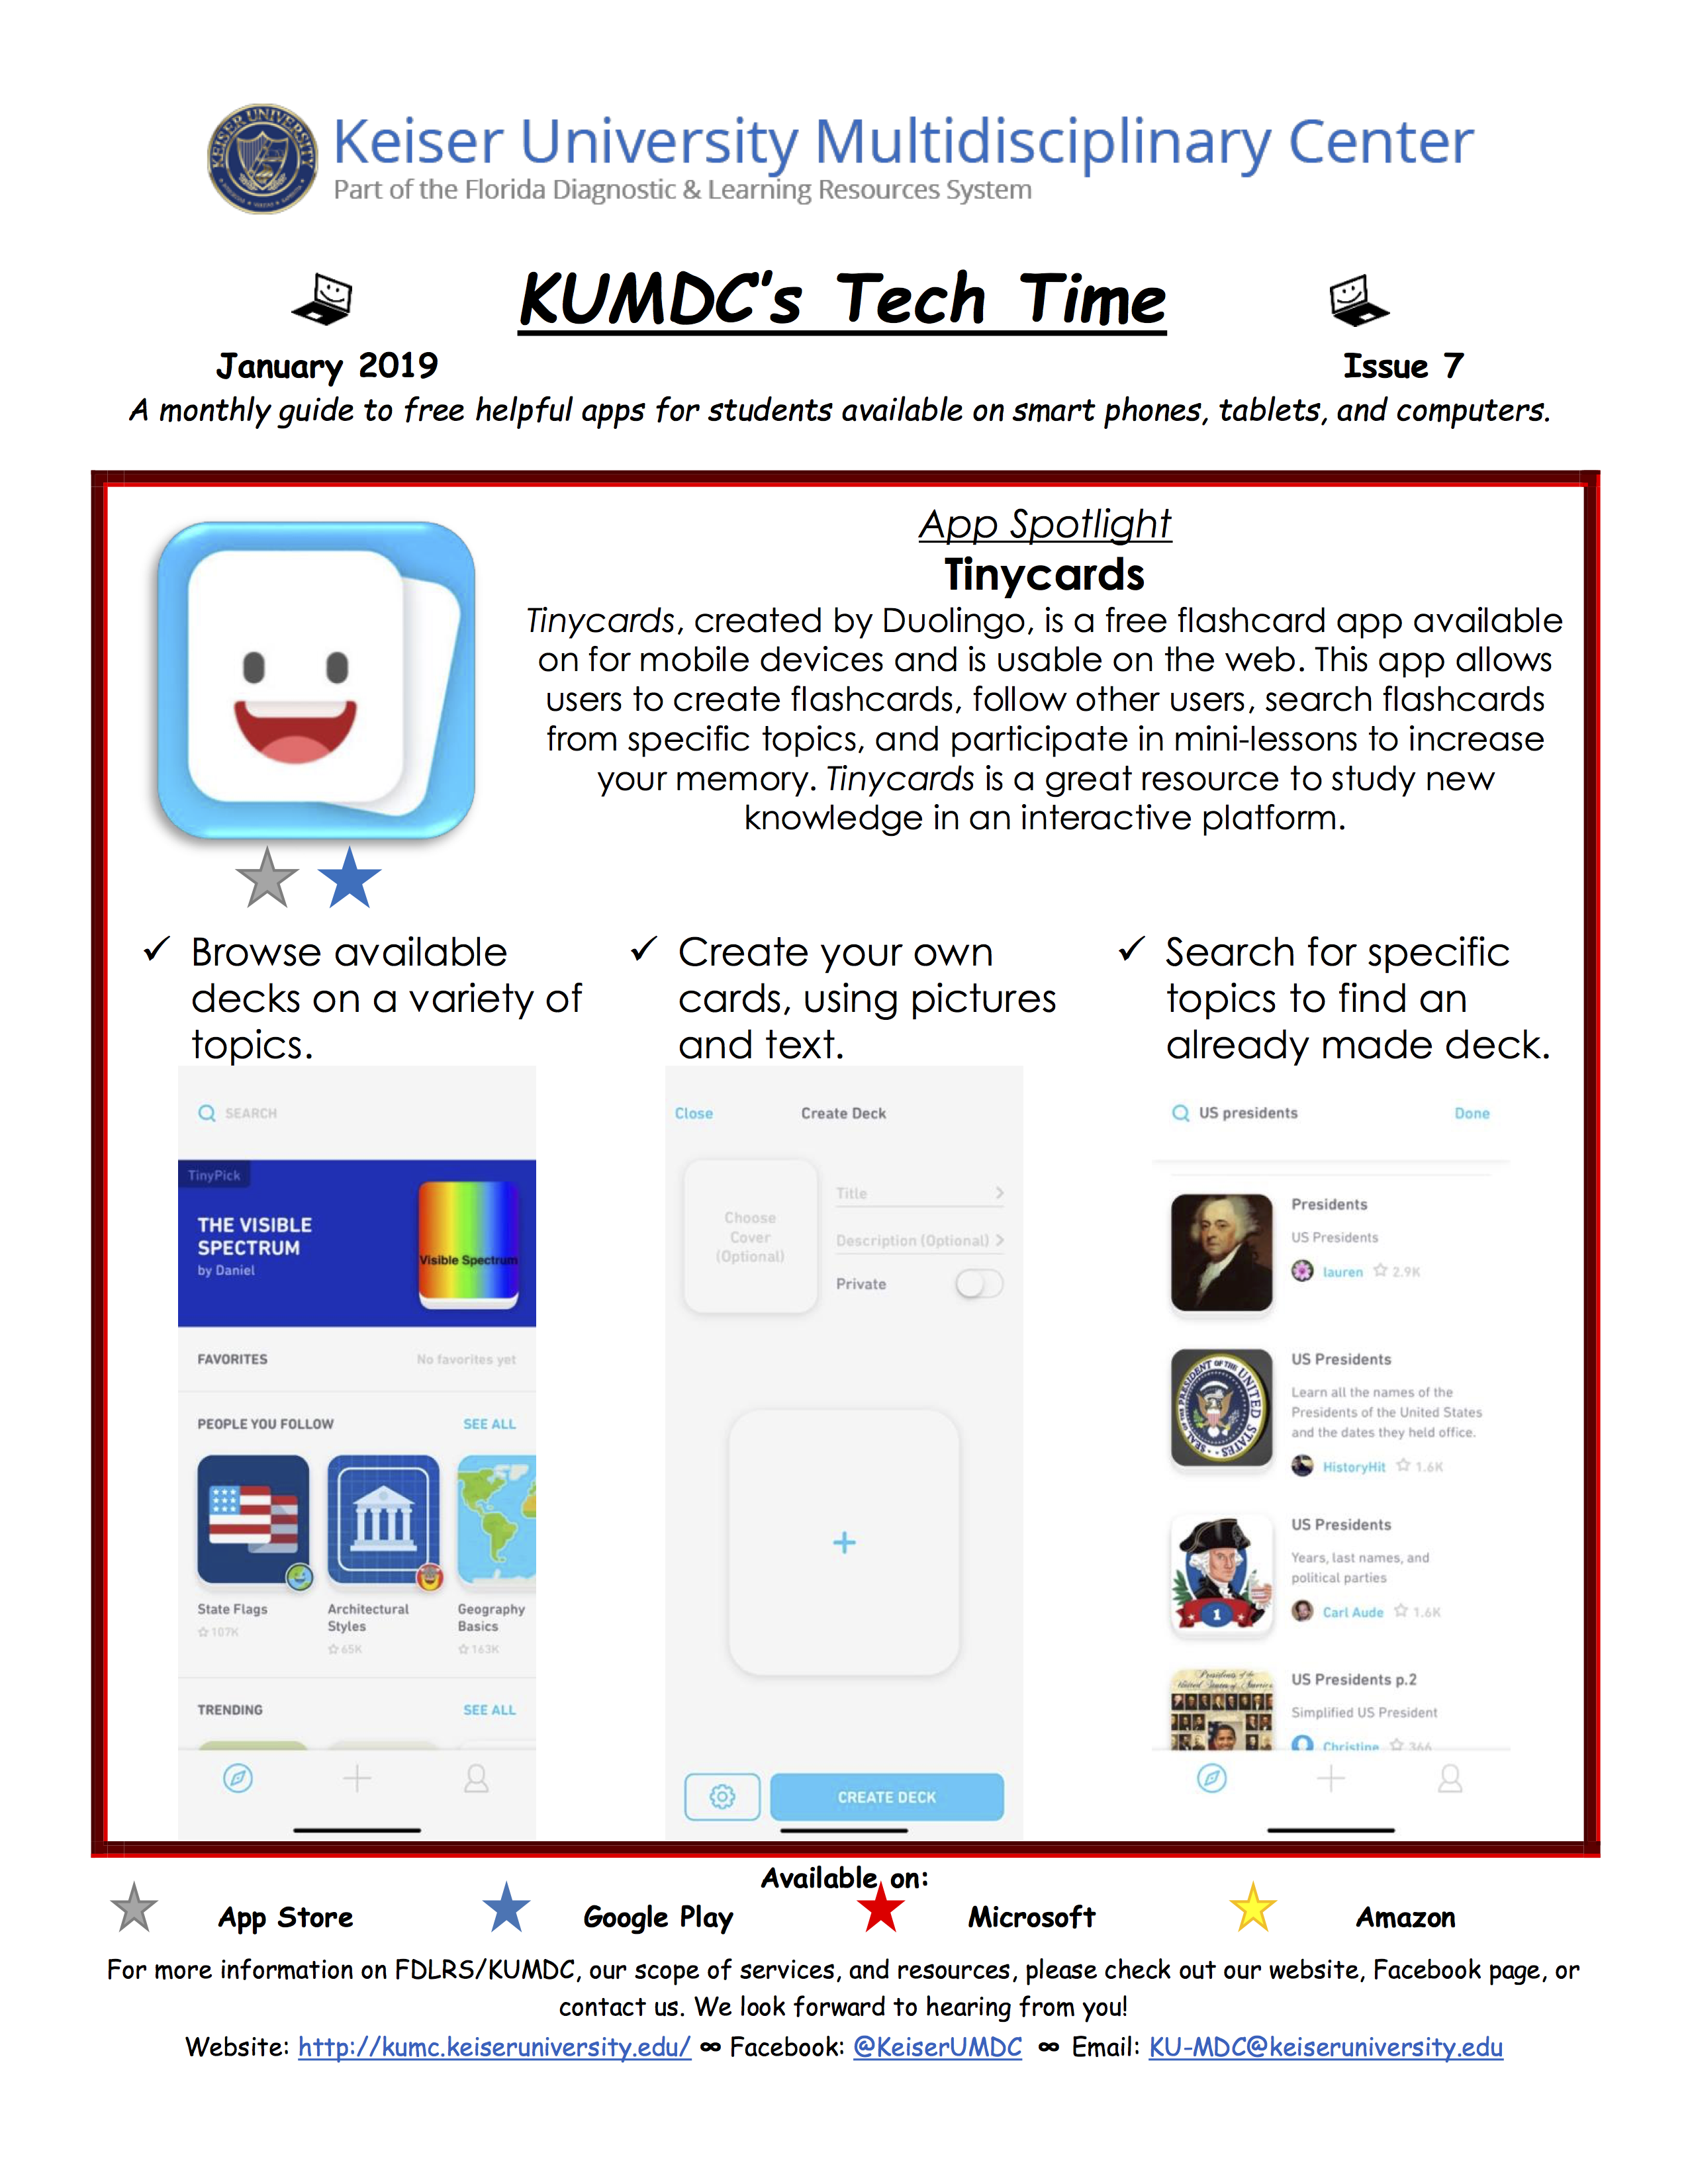 image with clickable link to January 2019 TechTime Newsletter